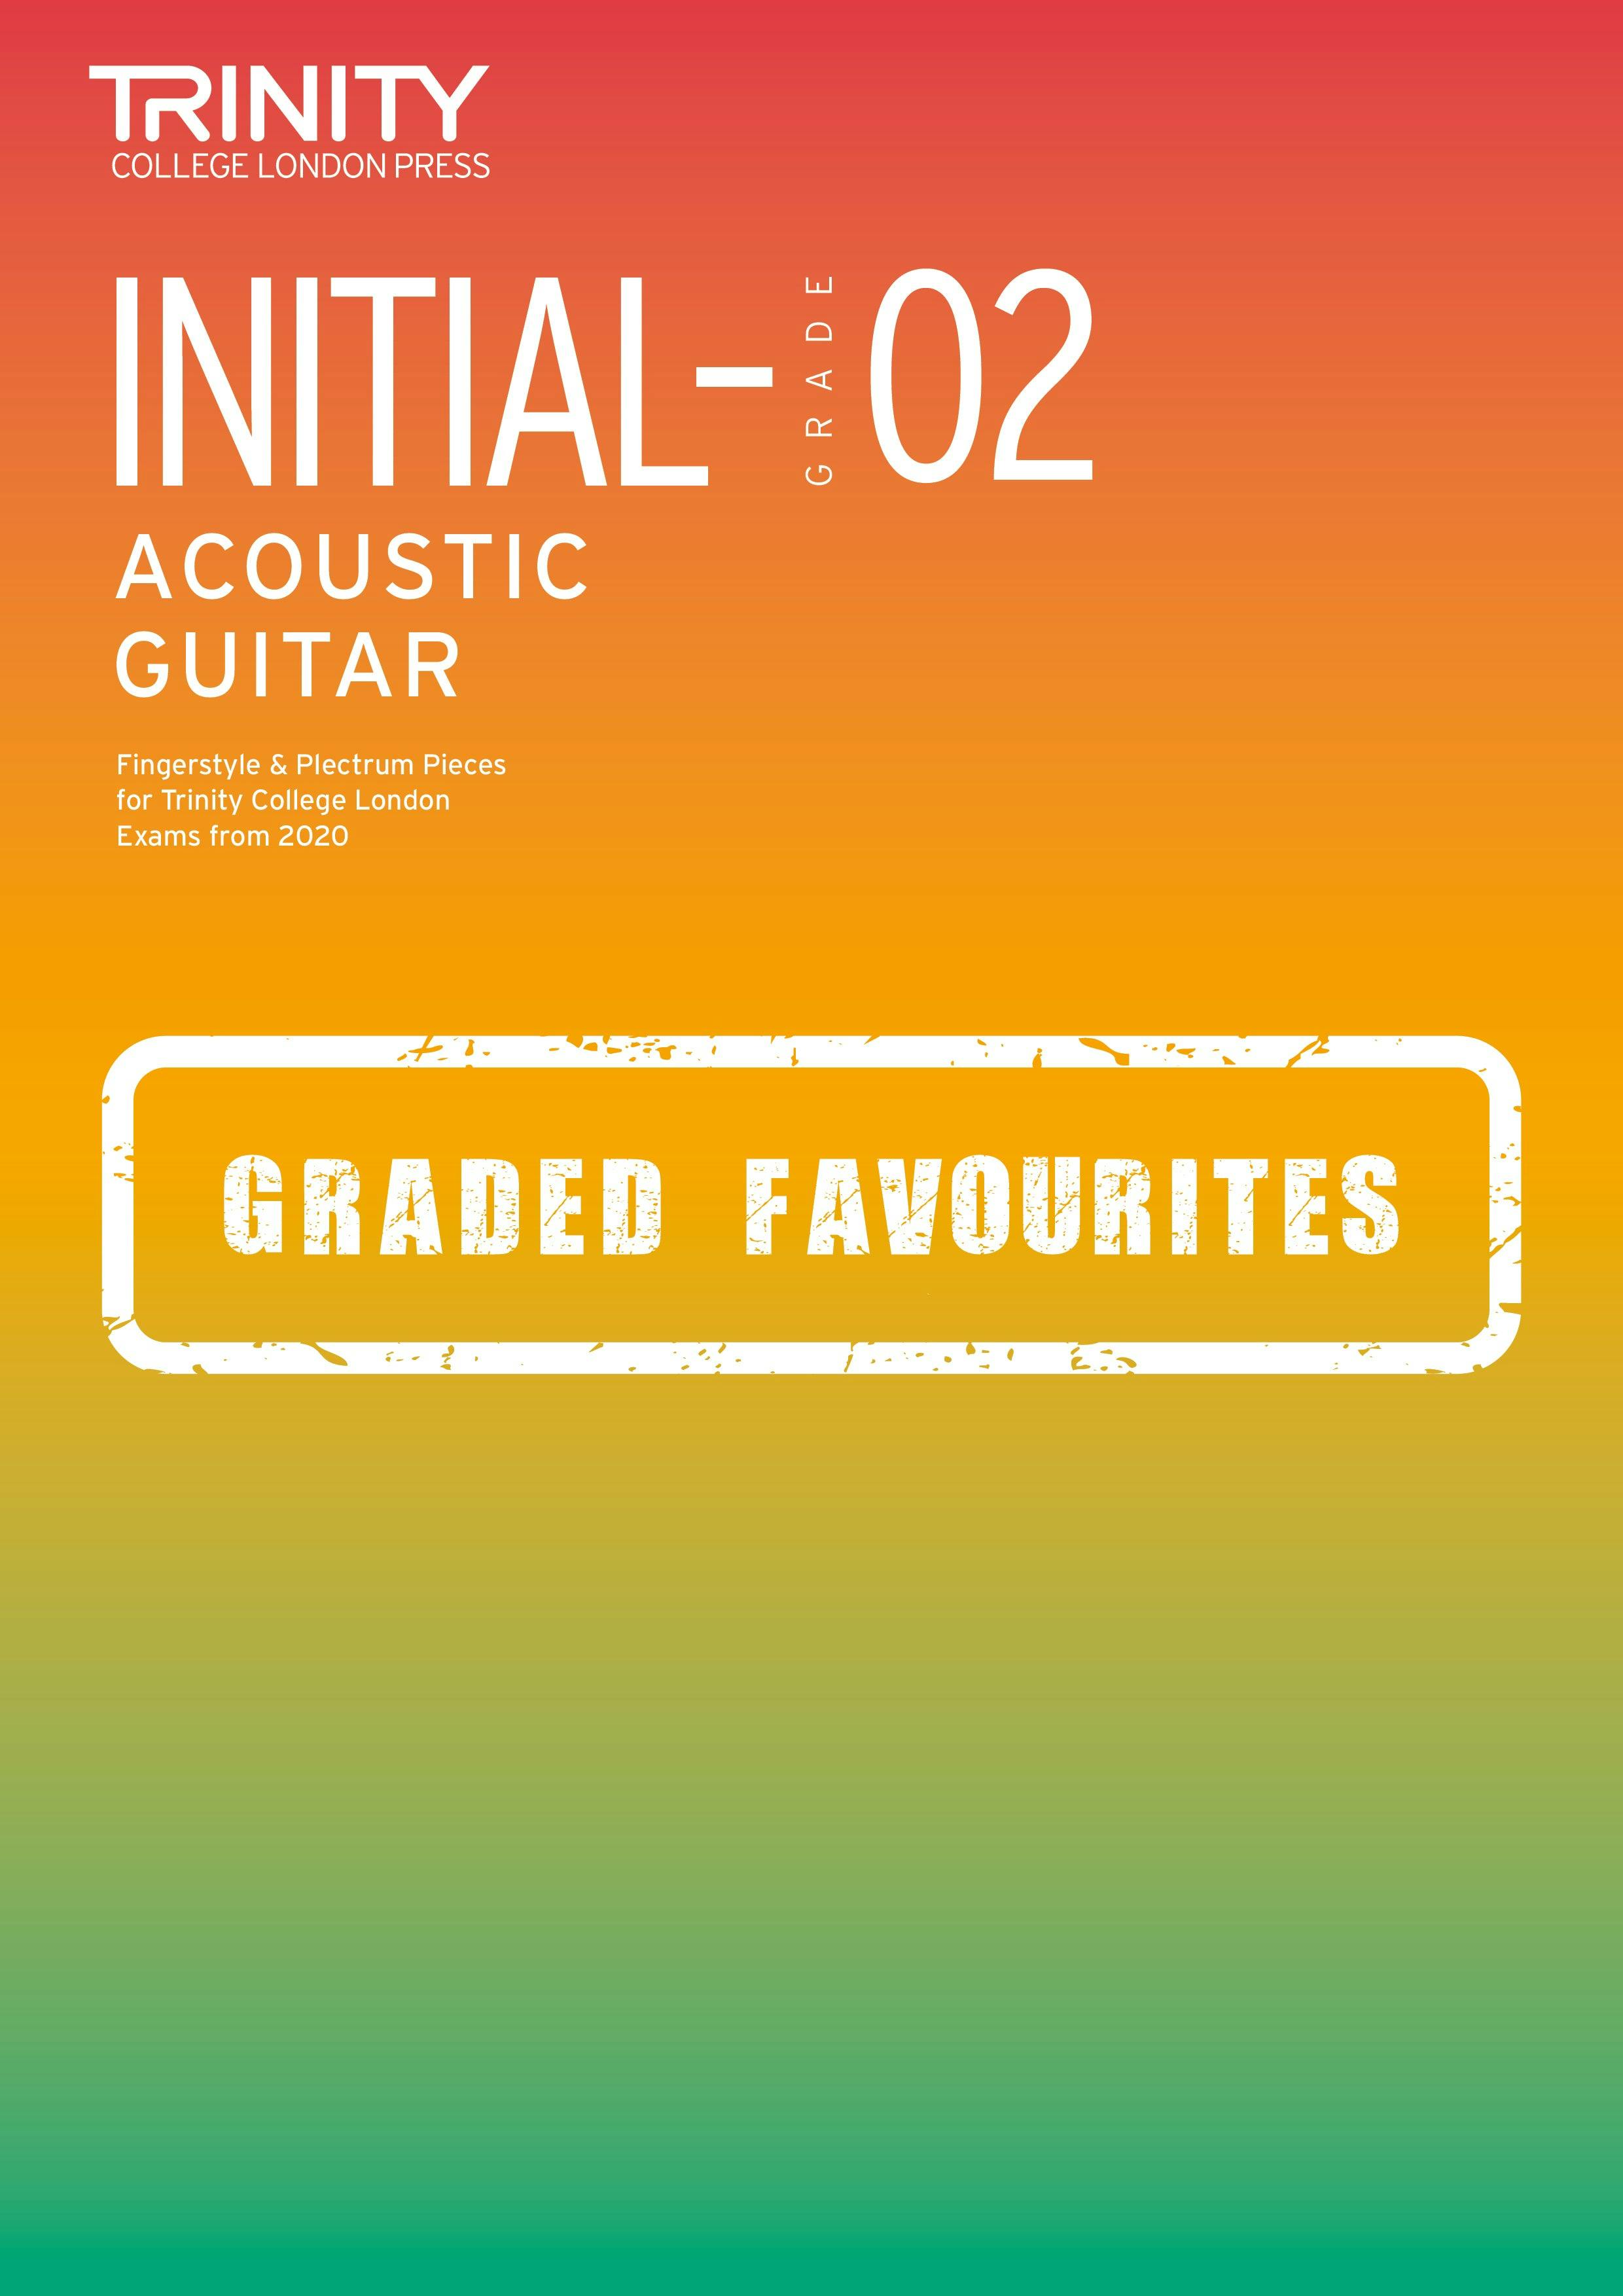 Graded Acoustic Guitar Favourites Exam Pieces from 2020 Initial-Grade 2